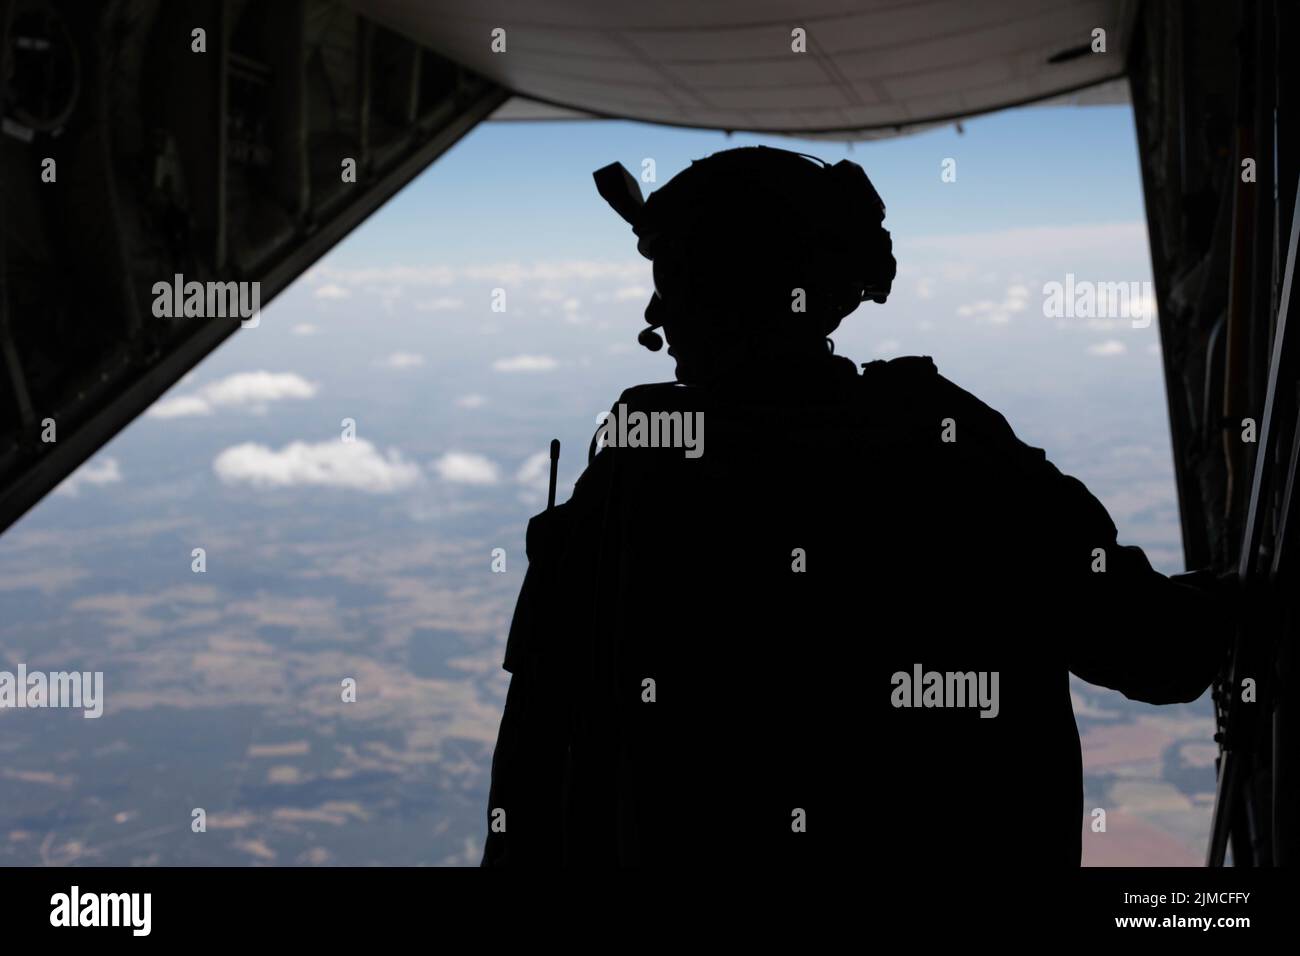 U.S. Marine Corps Capt. Justin Hoot, a team leader with 3rd Reconnaissance Battalion, 3rd Marine Division, III Marine Expeditionary Force, looks out the back of a C-130 Hercules at Hearne Municipal Airport, Hearne, Texas, July 20, 2022. This training was conducted during exercise Desert Eagle 2022 to reinforce proper techniques and the Marines’ proficiency in support of future III MEF operations within the Indo-Pacific region. (U.S. Marine Corps photo by Cpl. Zachary Sarvey) Stock Photo